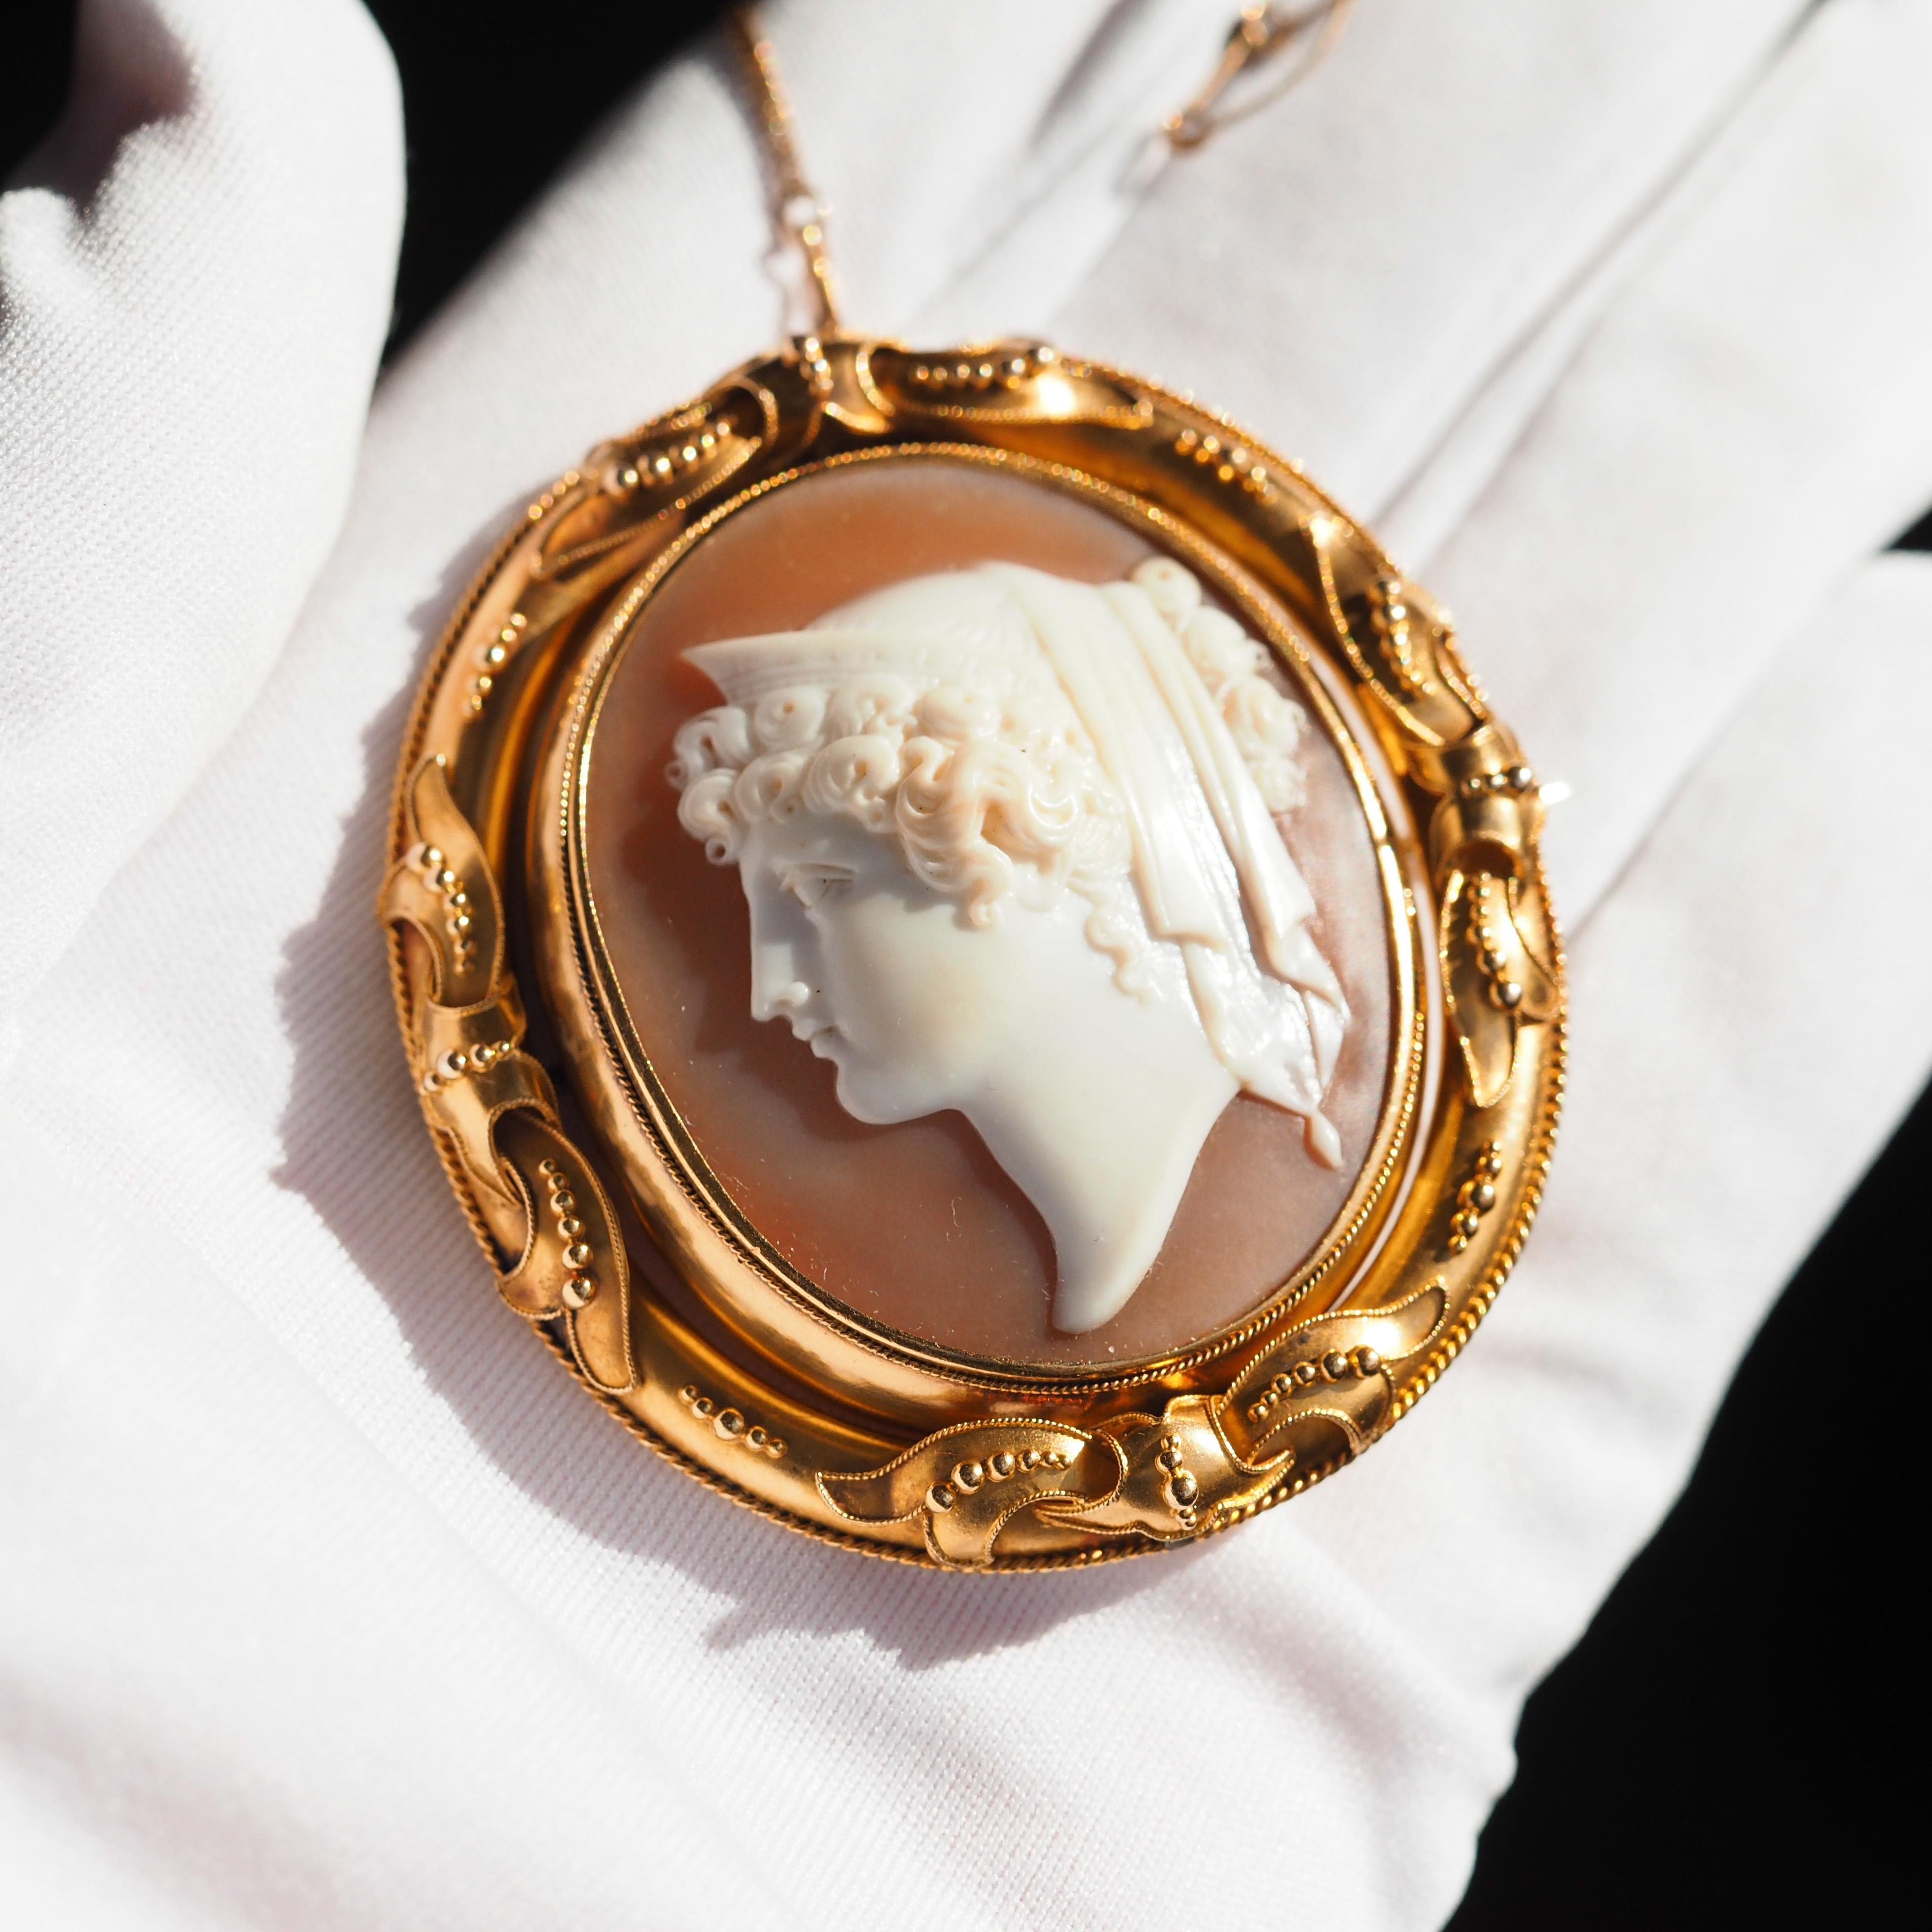 Antique Cameo Brooch Pendant Necklace 18K Gold - Victorian c.1860 For Sale 16